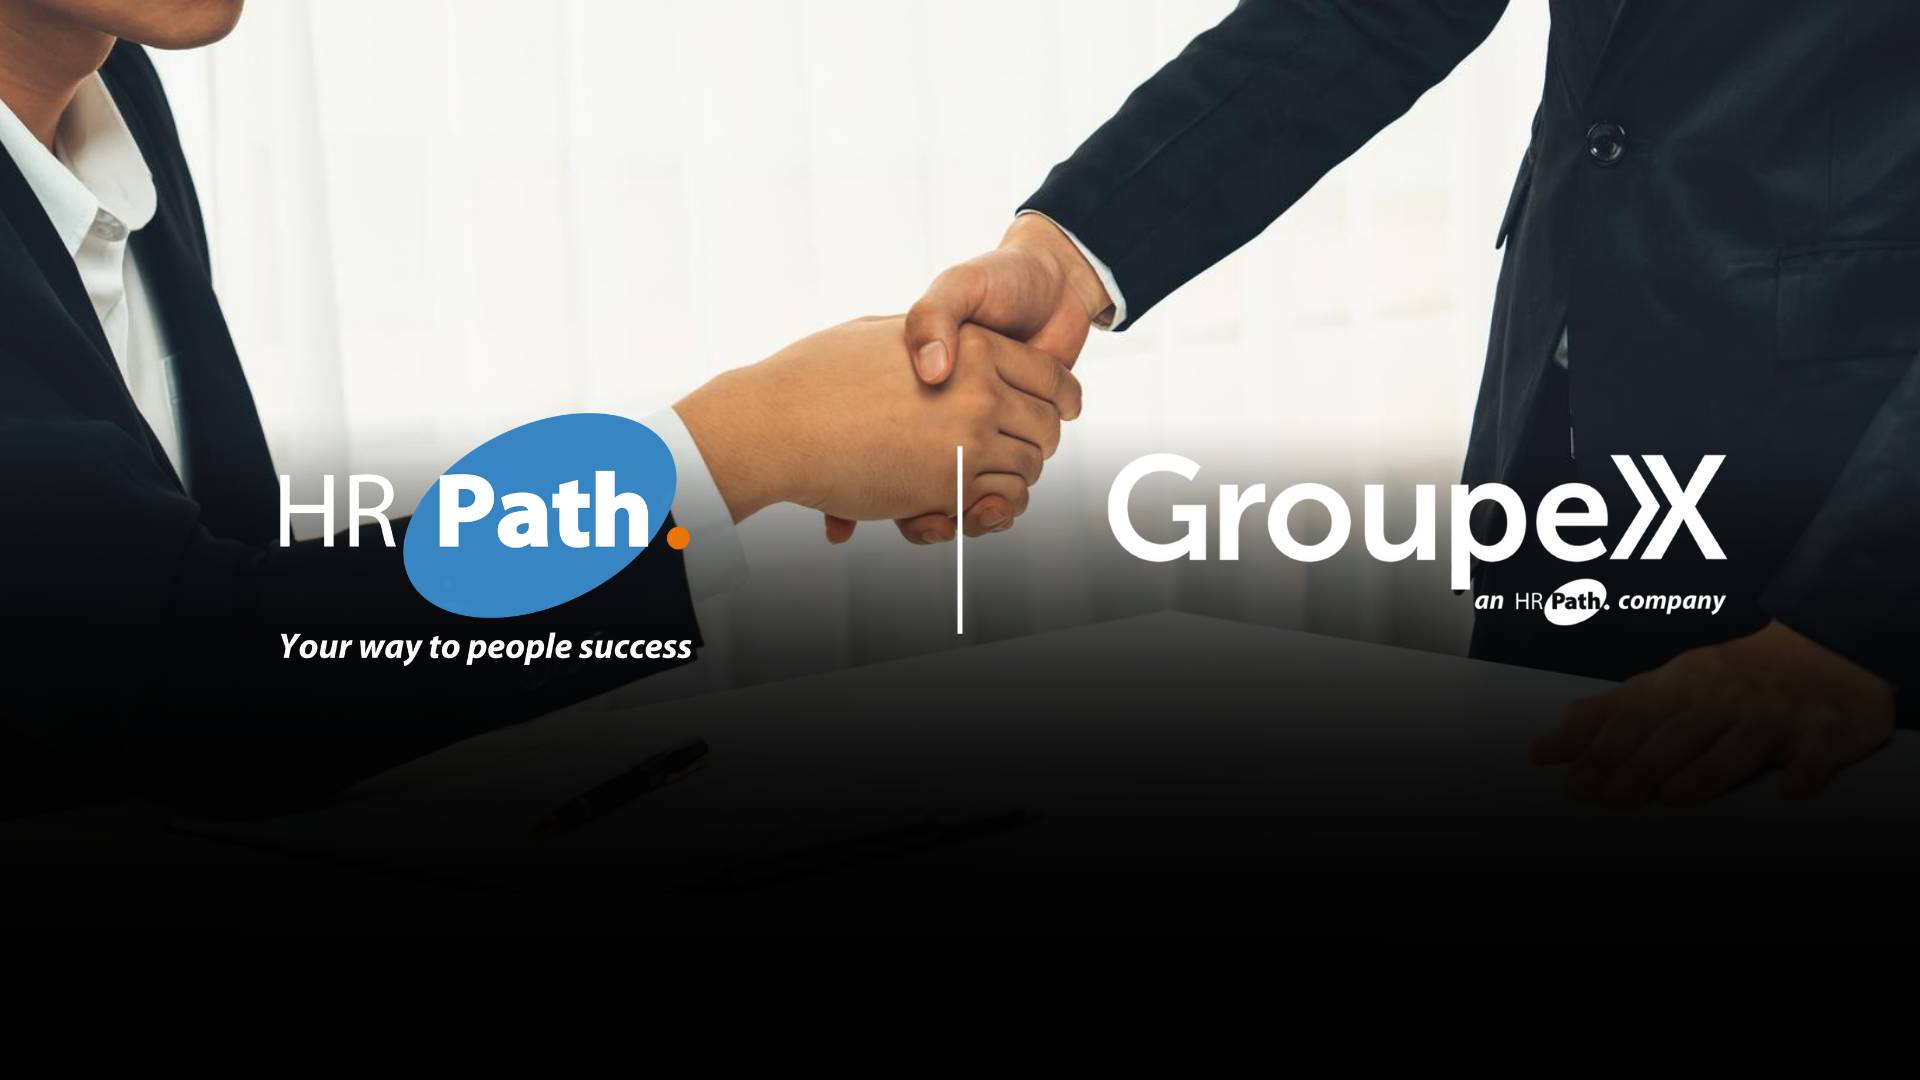 HR Path Expands North American Presence with Acquisition of GroupeX Solutions